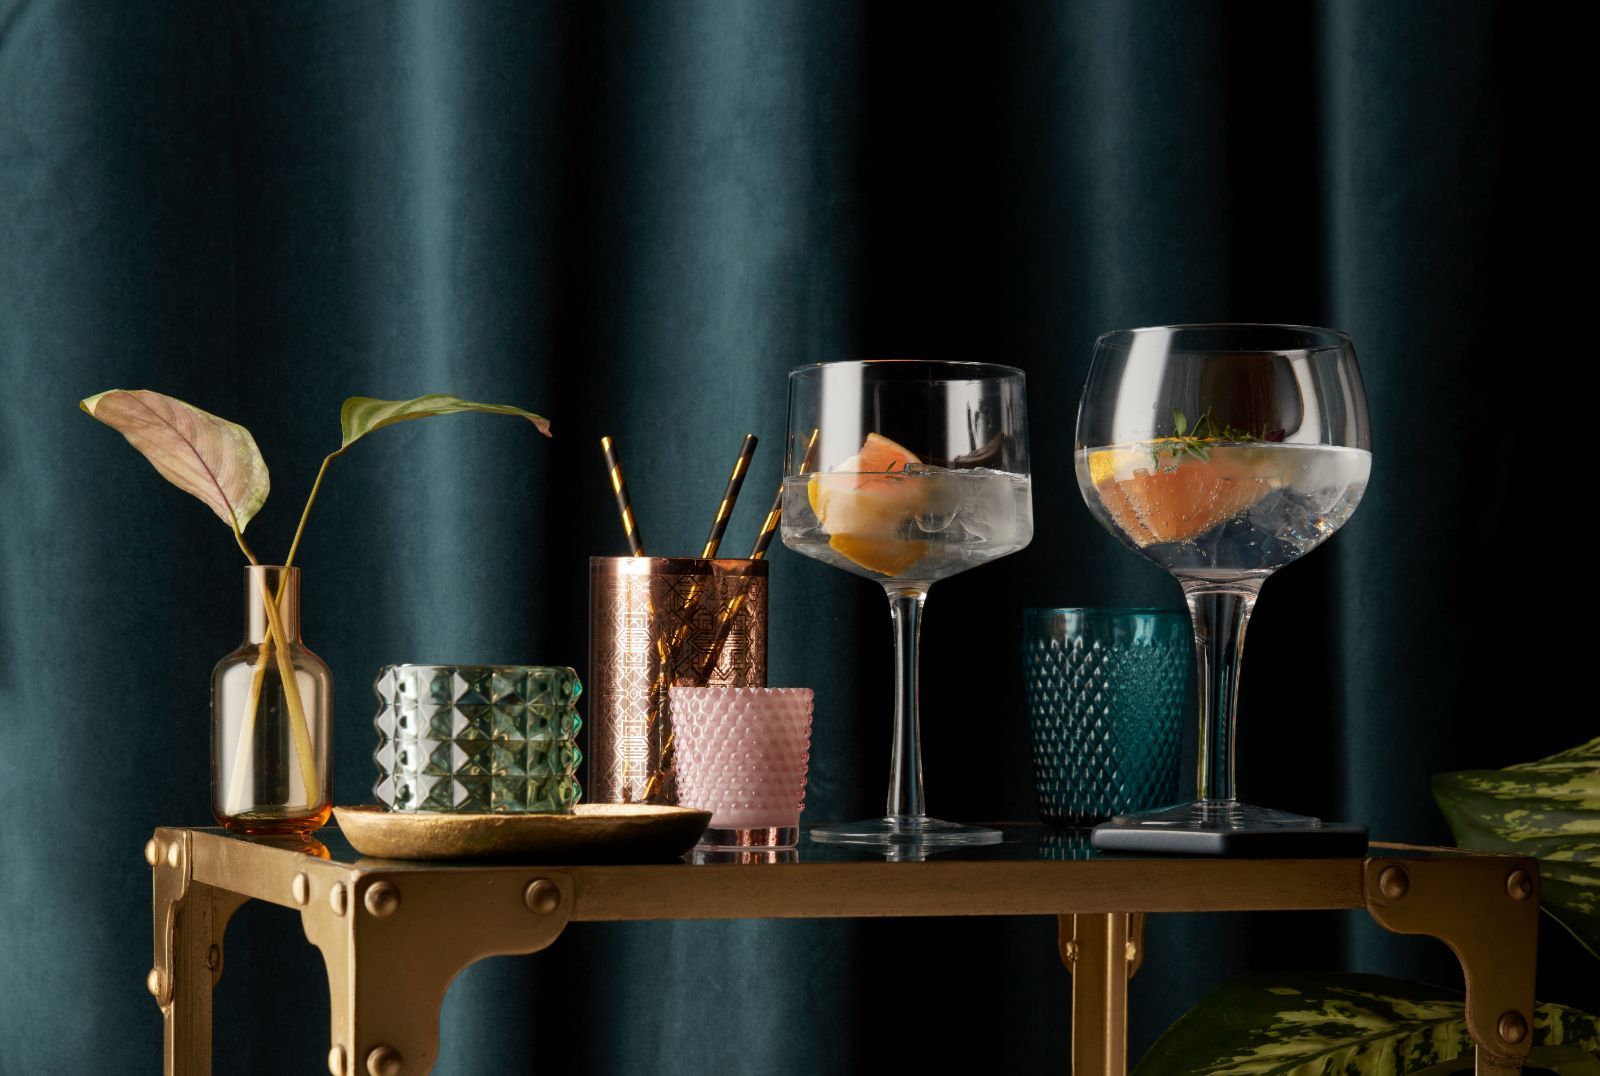 https://www.denbypottery.com/file/v4687010306314405748/general/Gold%20bar%20cart%20with%20gin%20glasses%20and%20candles.jpg